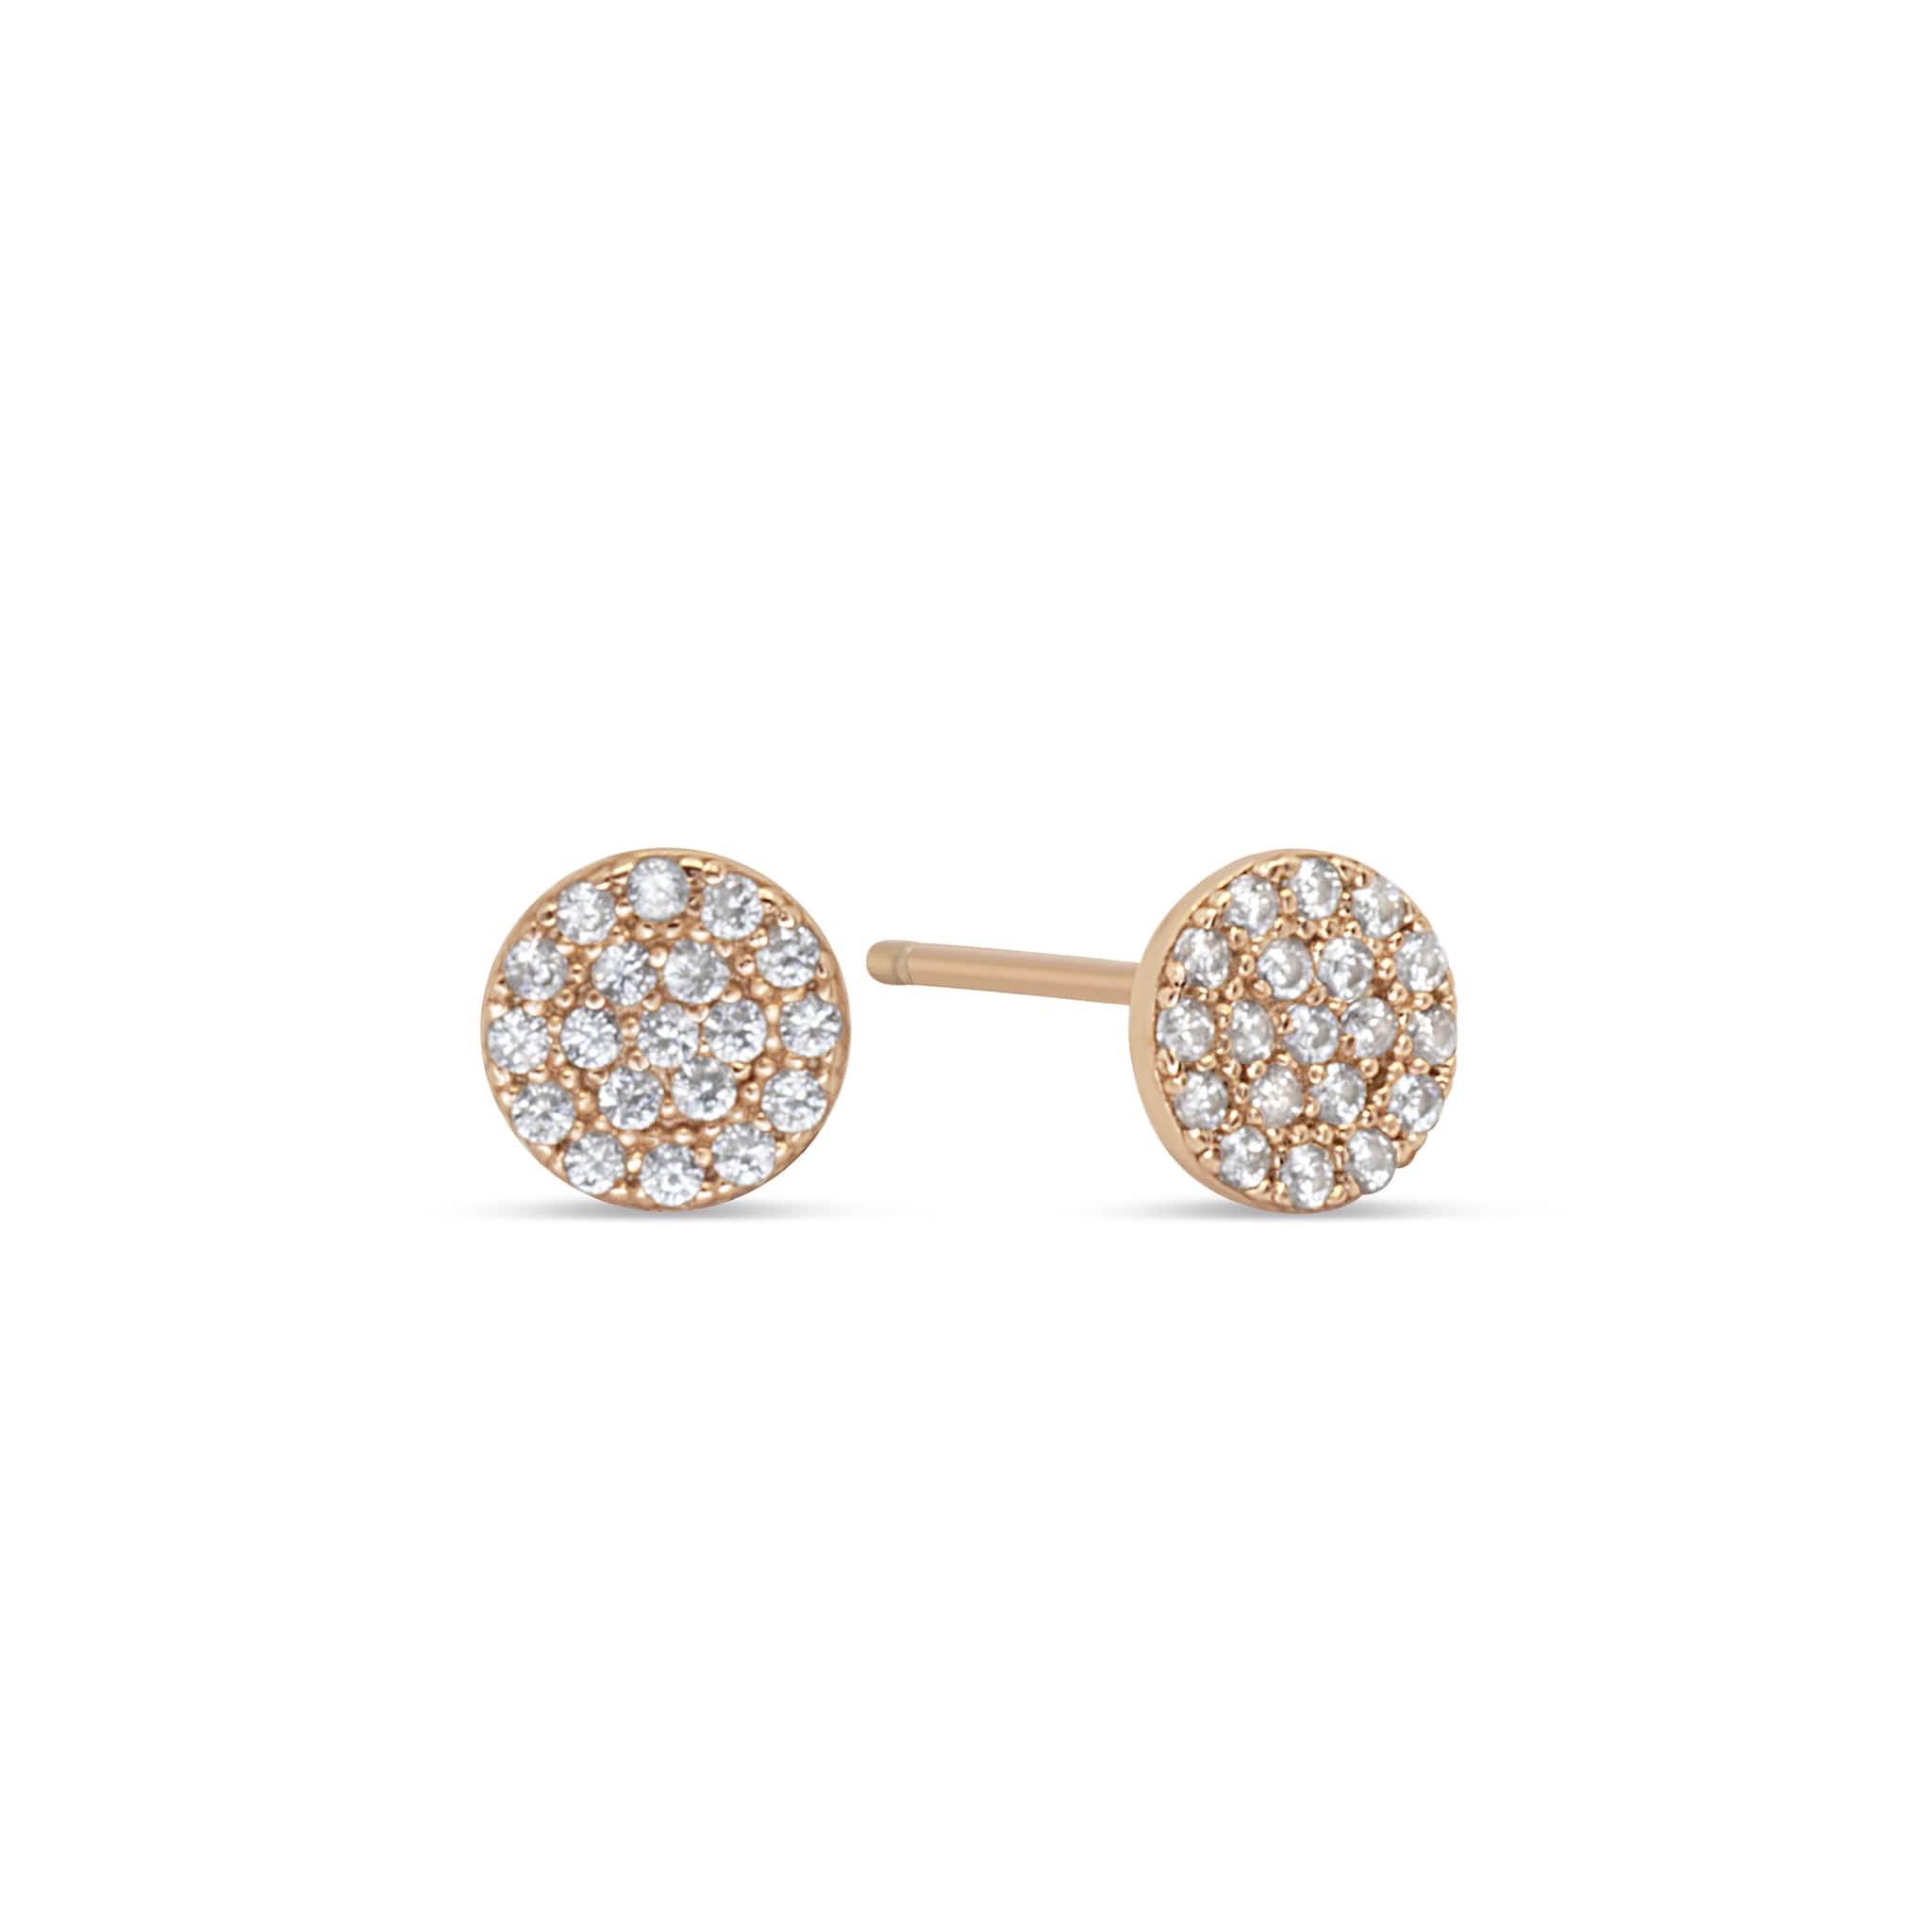 Pretty gold plated cubic zirconia earrings